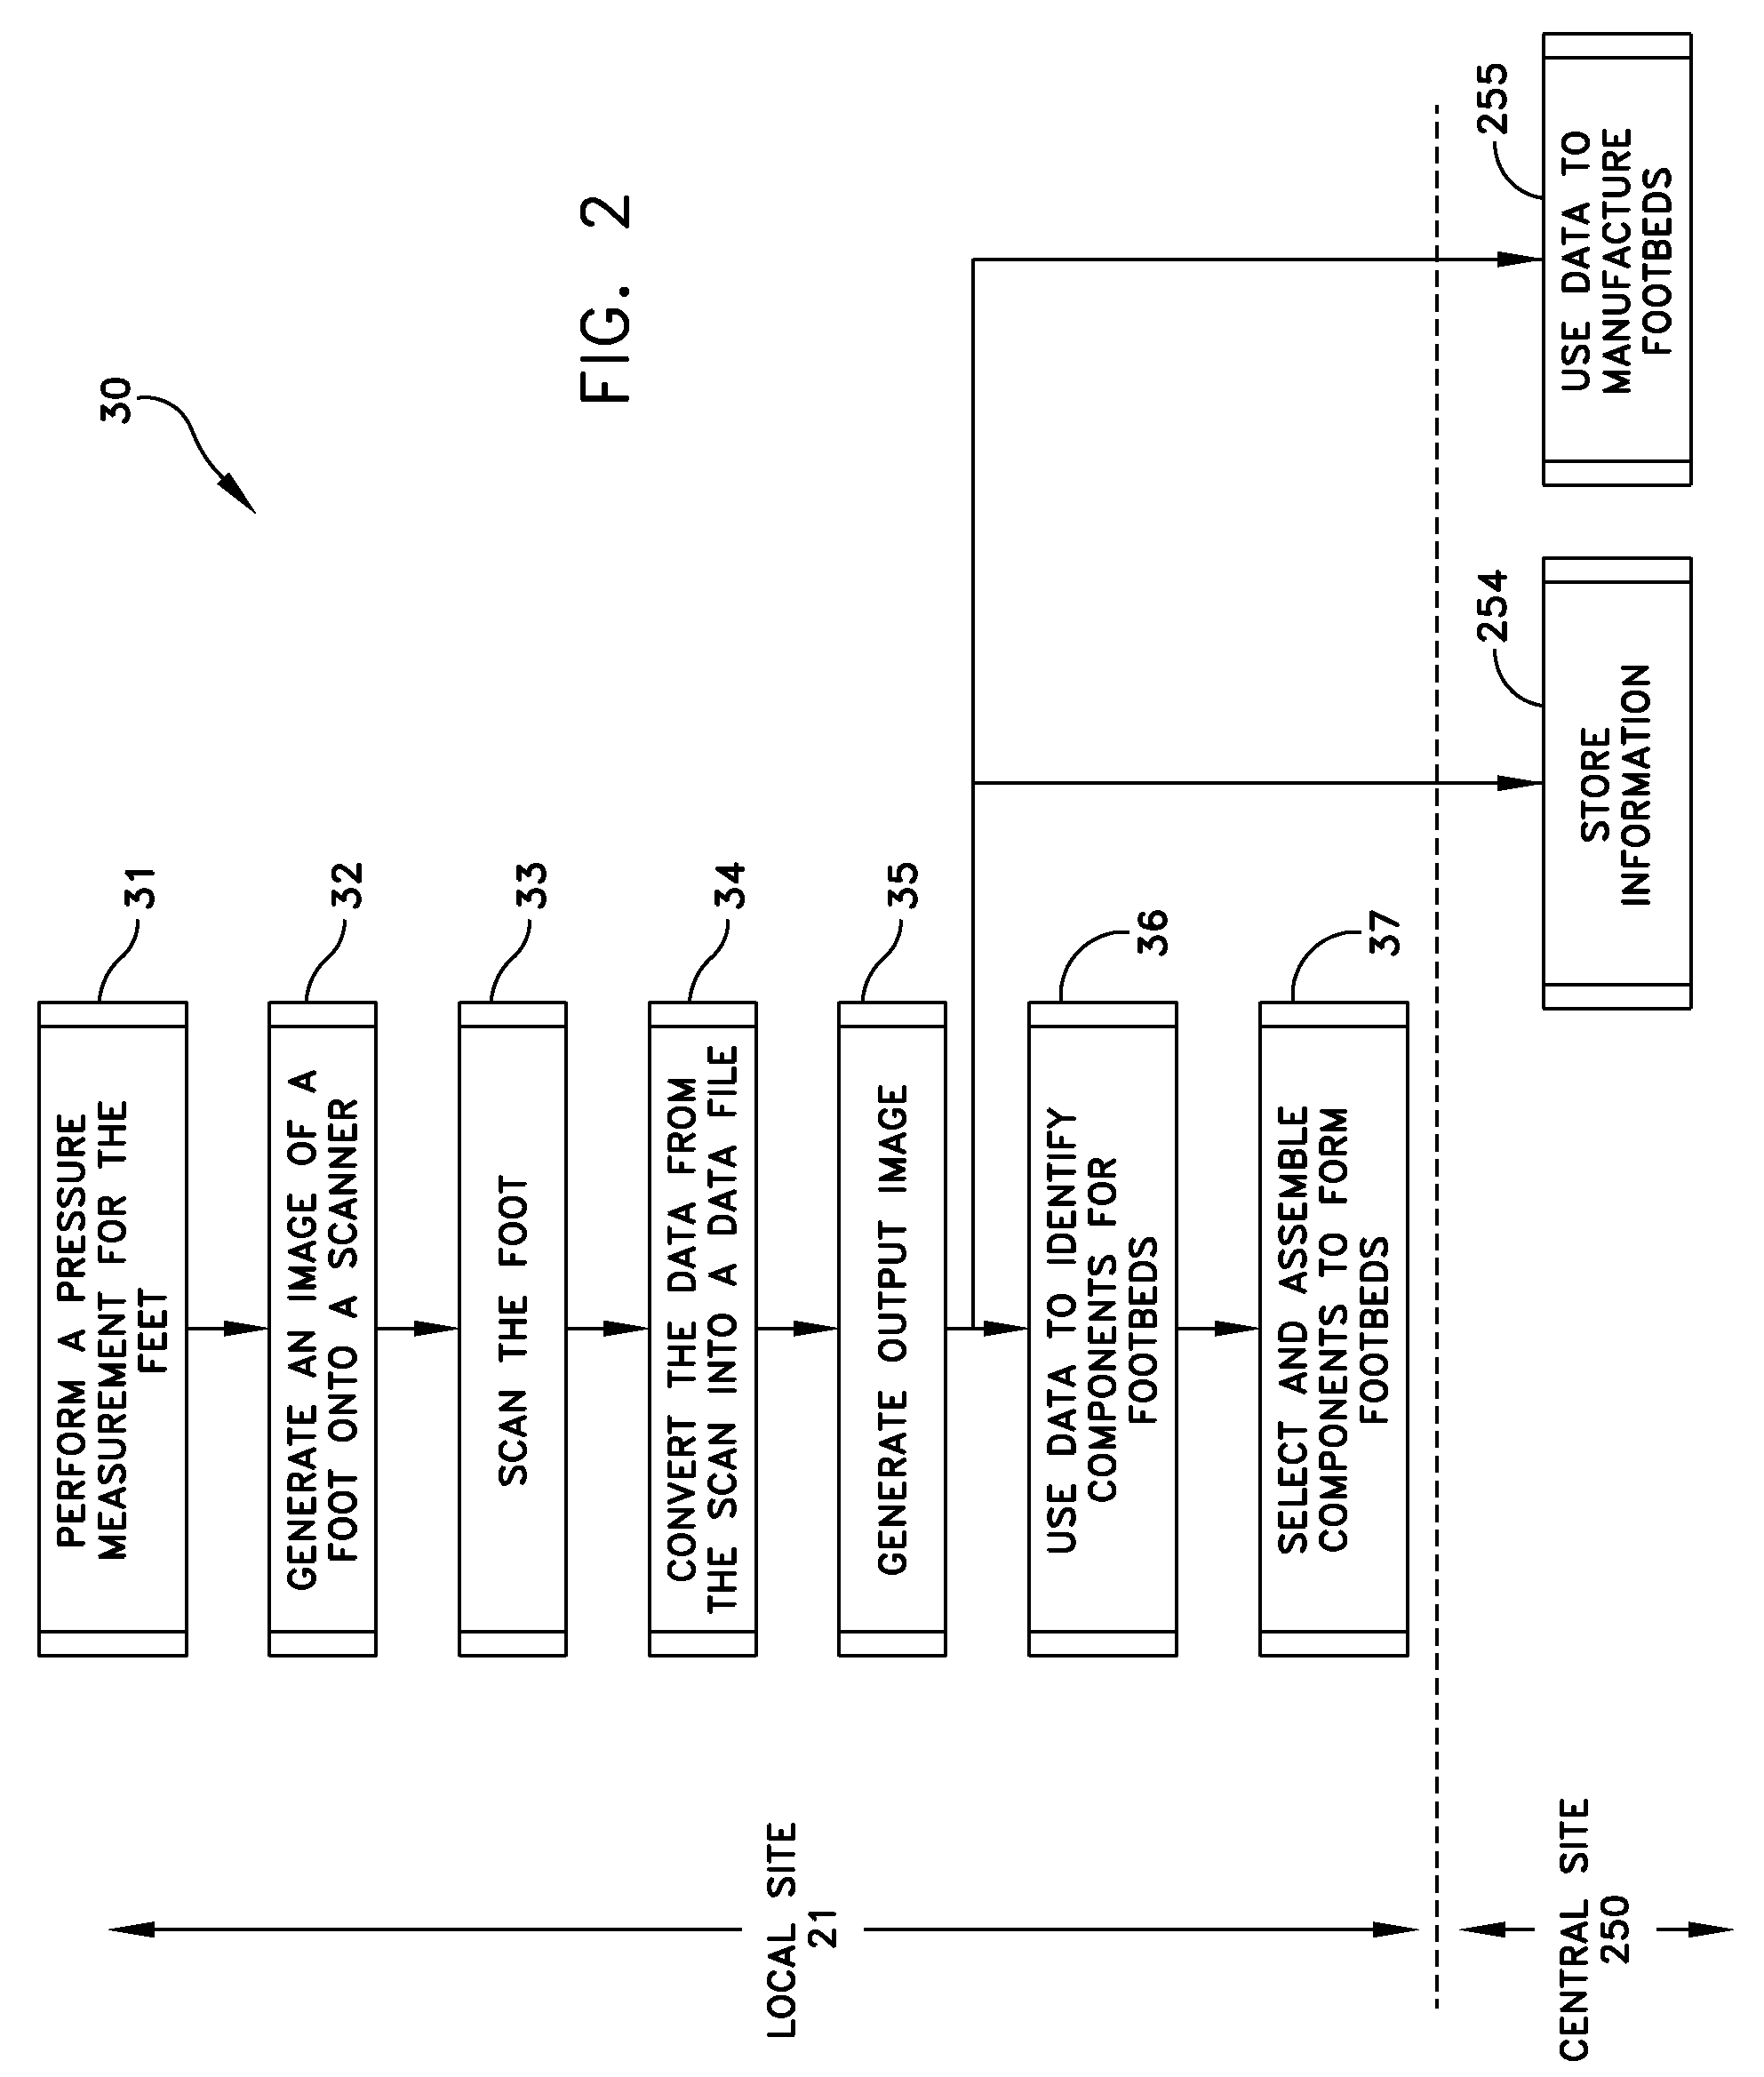 Footbeds and a Method and Apparatus for Producing Such Footbeds